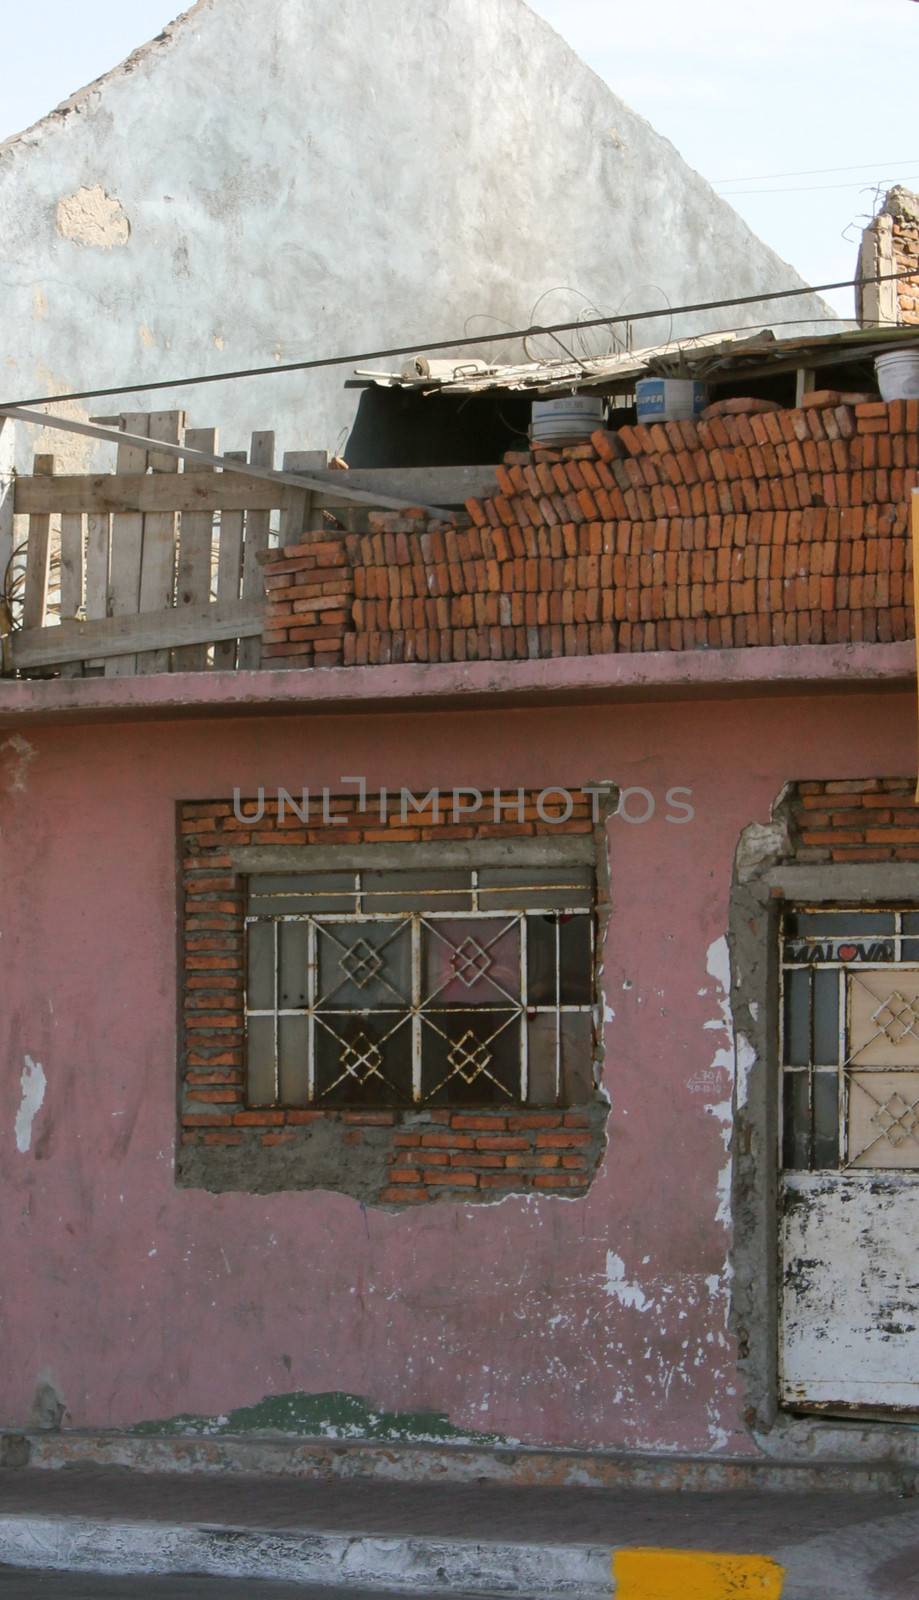 The exterior of an abandoned and decaying pink house with building materials on the rooftop, suggesting repairs.